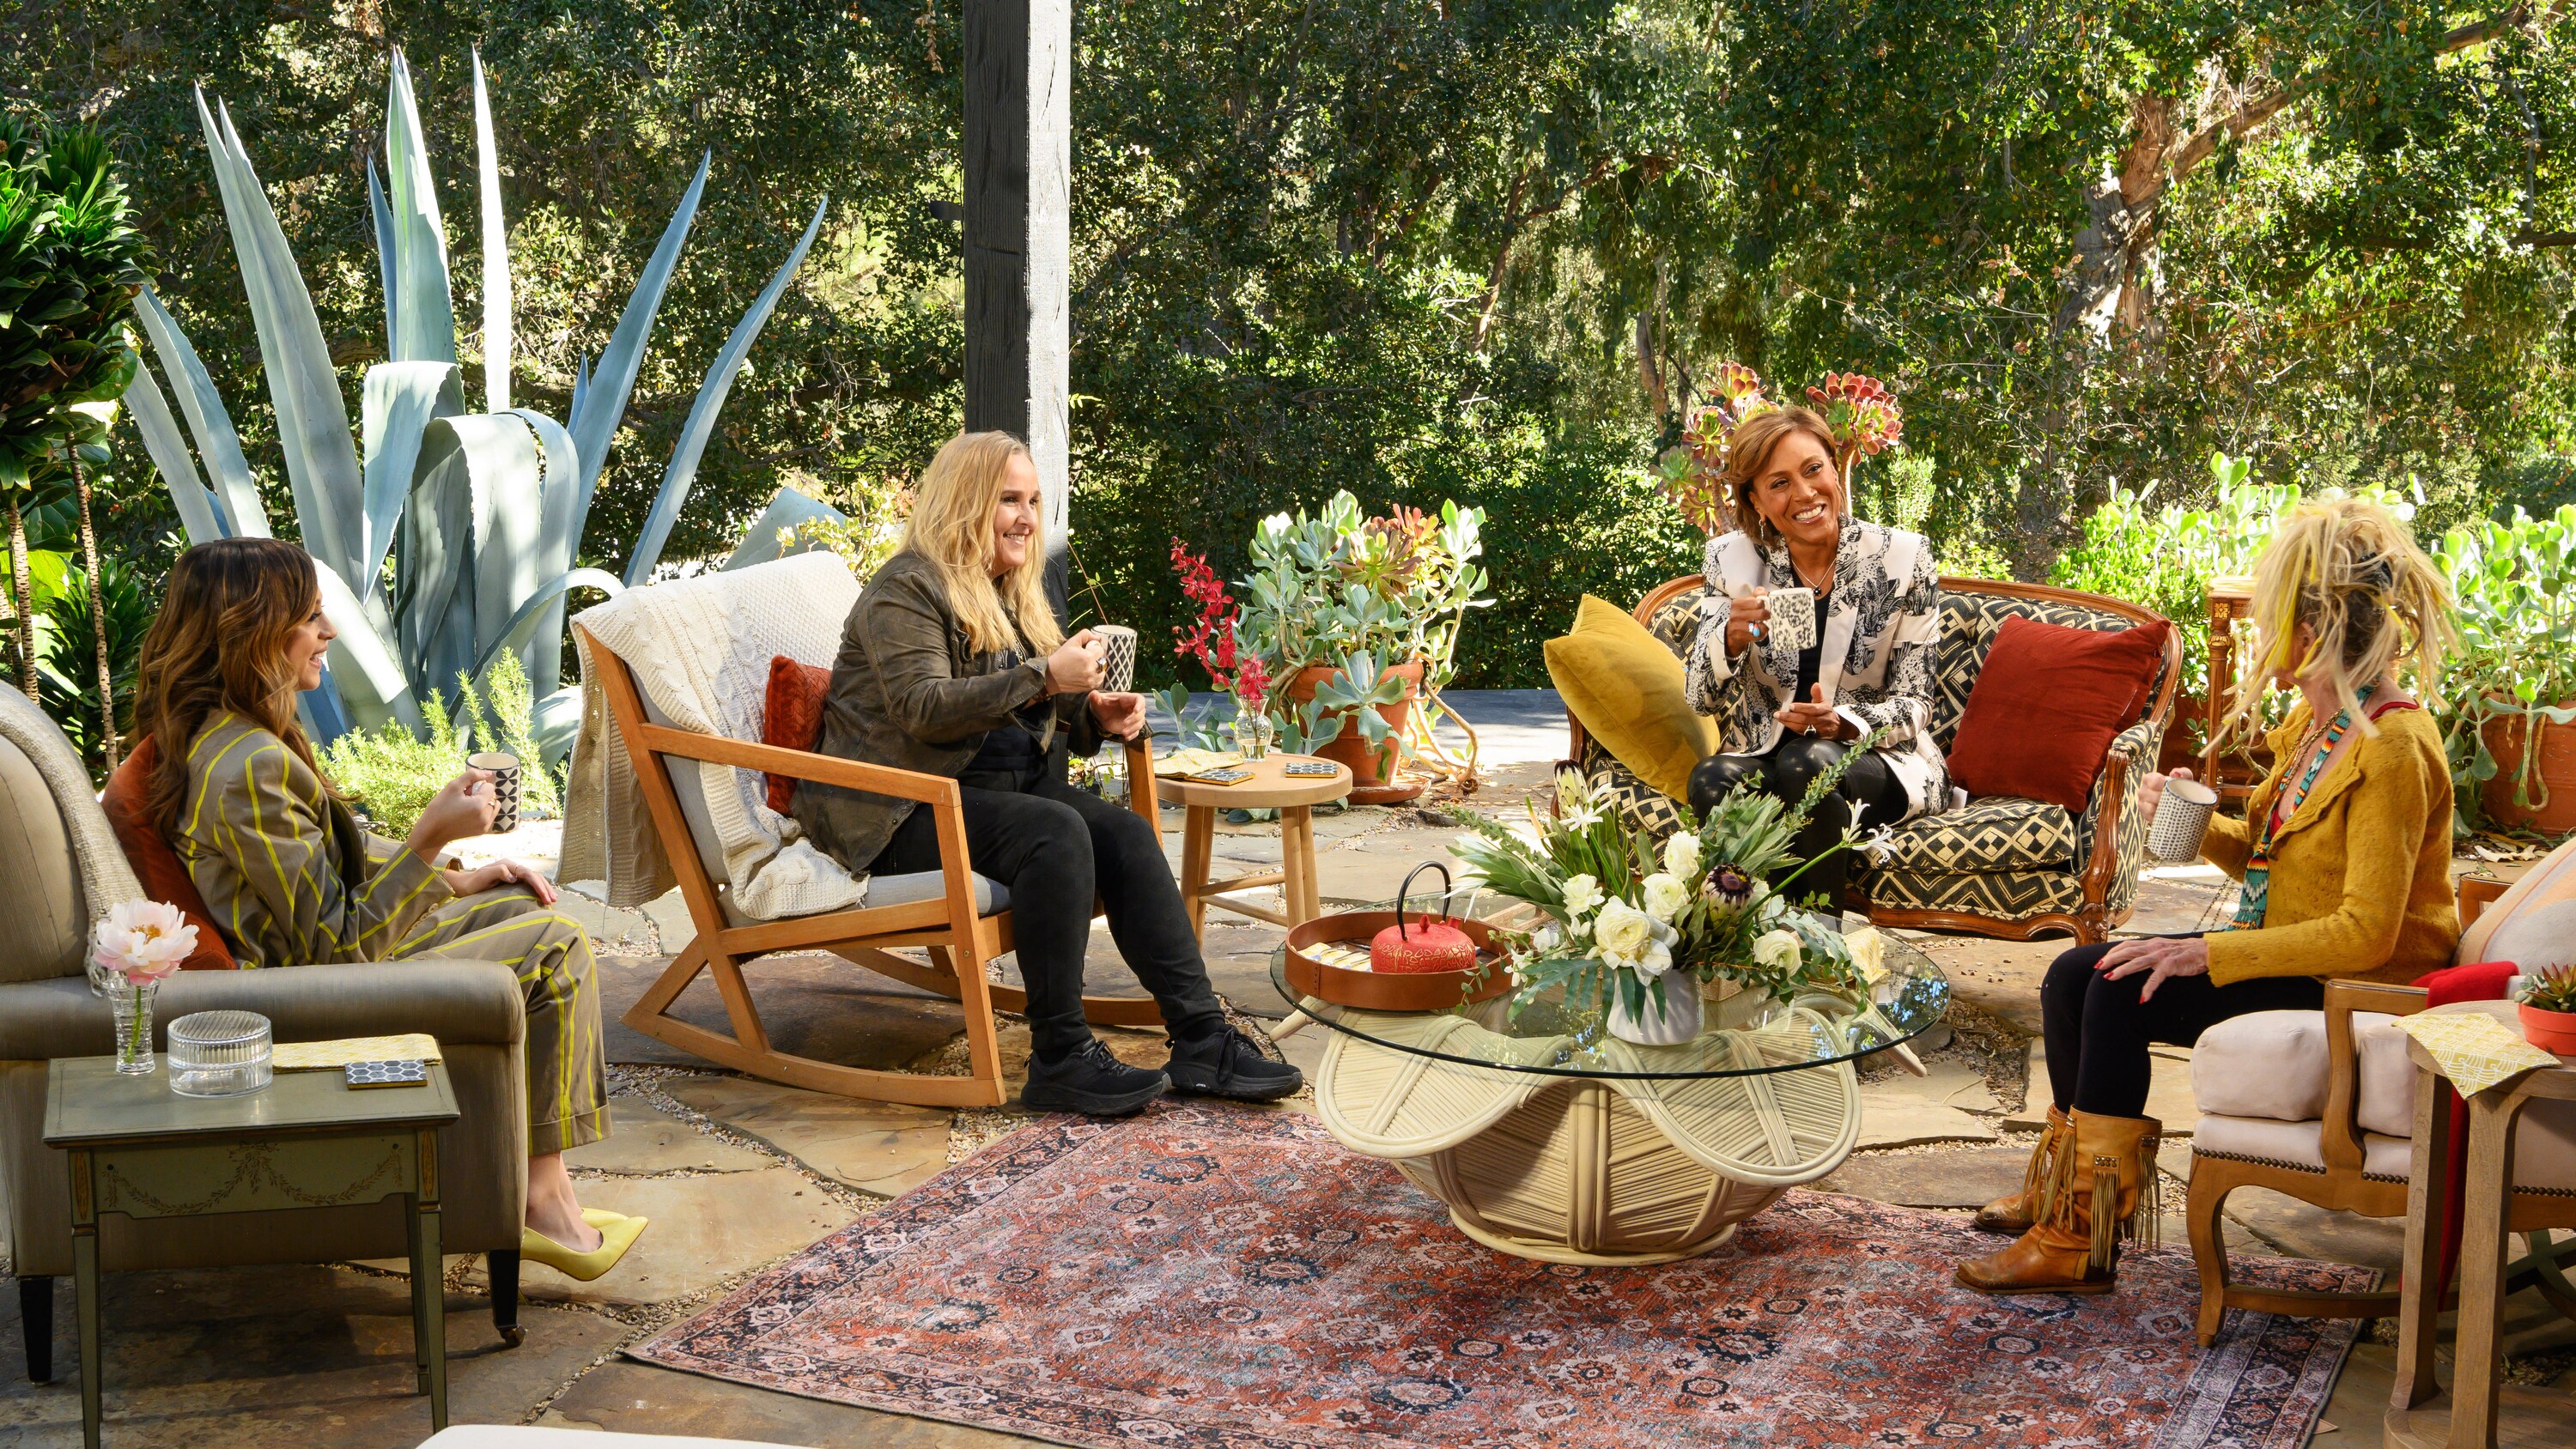 TURNING THE TABLES WITH ROBIN ROBERTS - "Episode 102” - Melissa Etheridge, Betsy Johnson, Josie Totah. (Disney/Richard Harbaugh) JOSIE TOTAH, MELISSA ETHERIDGE, ROBIN ROBERTS, BETSY JOHNSON